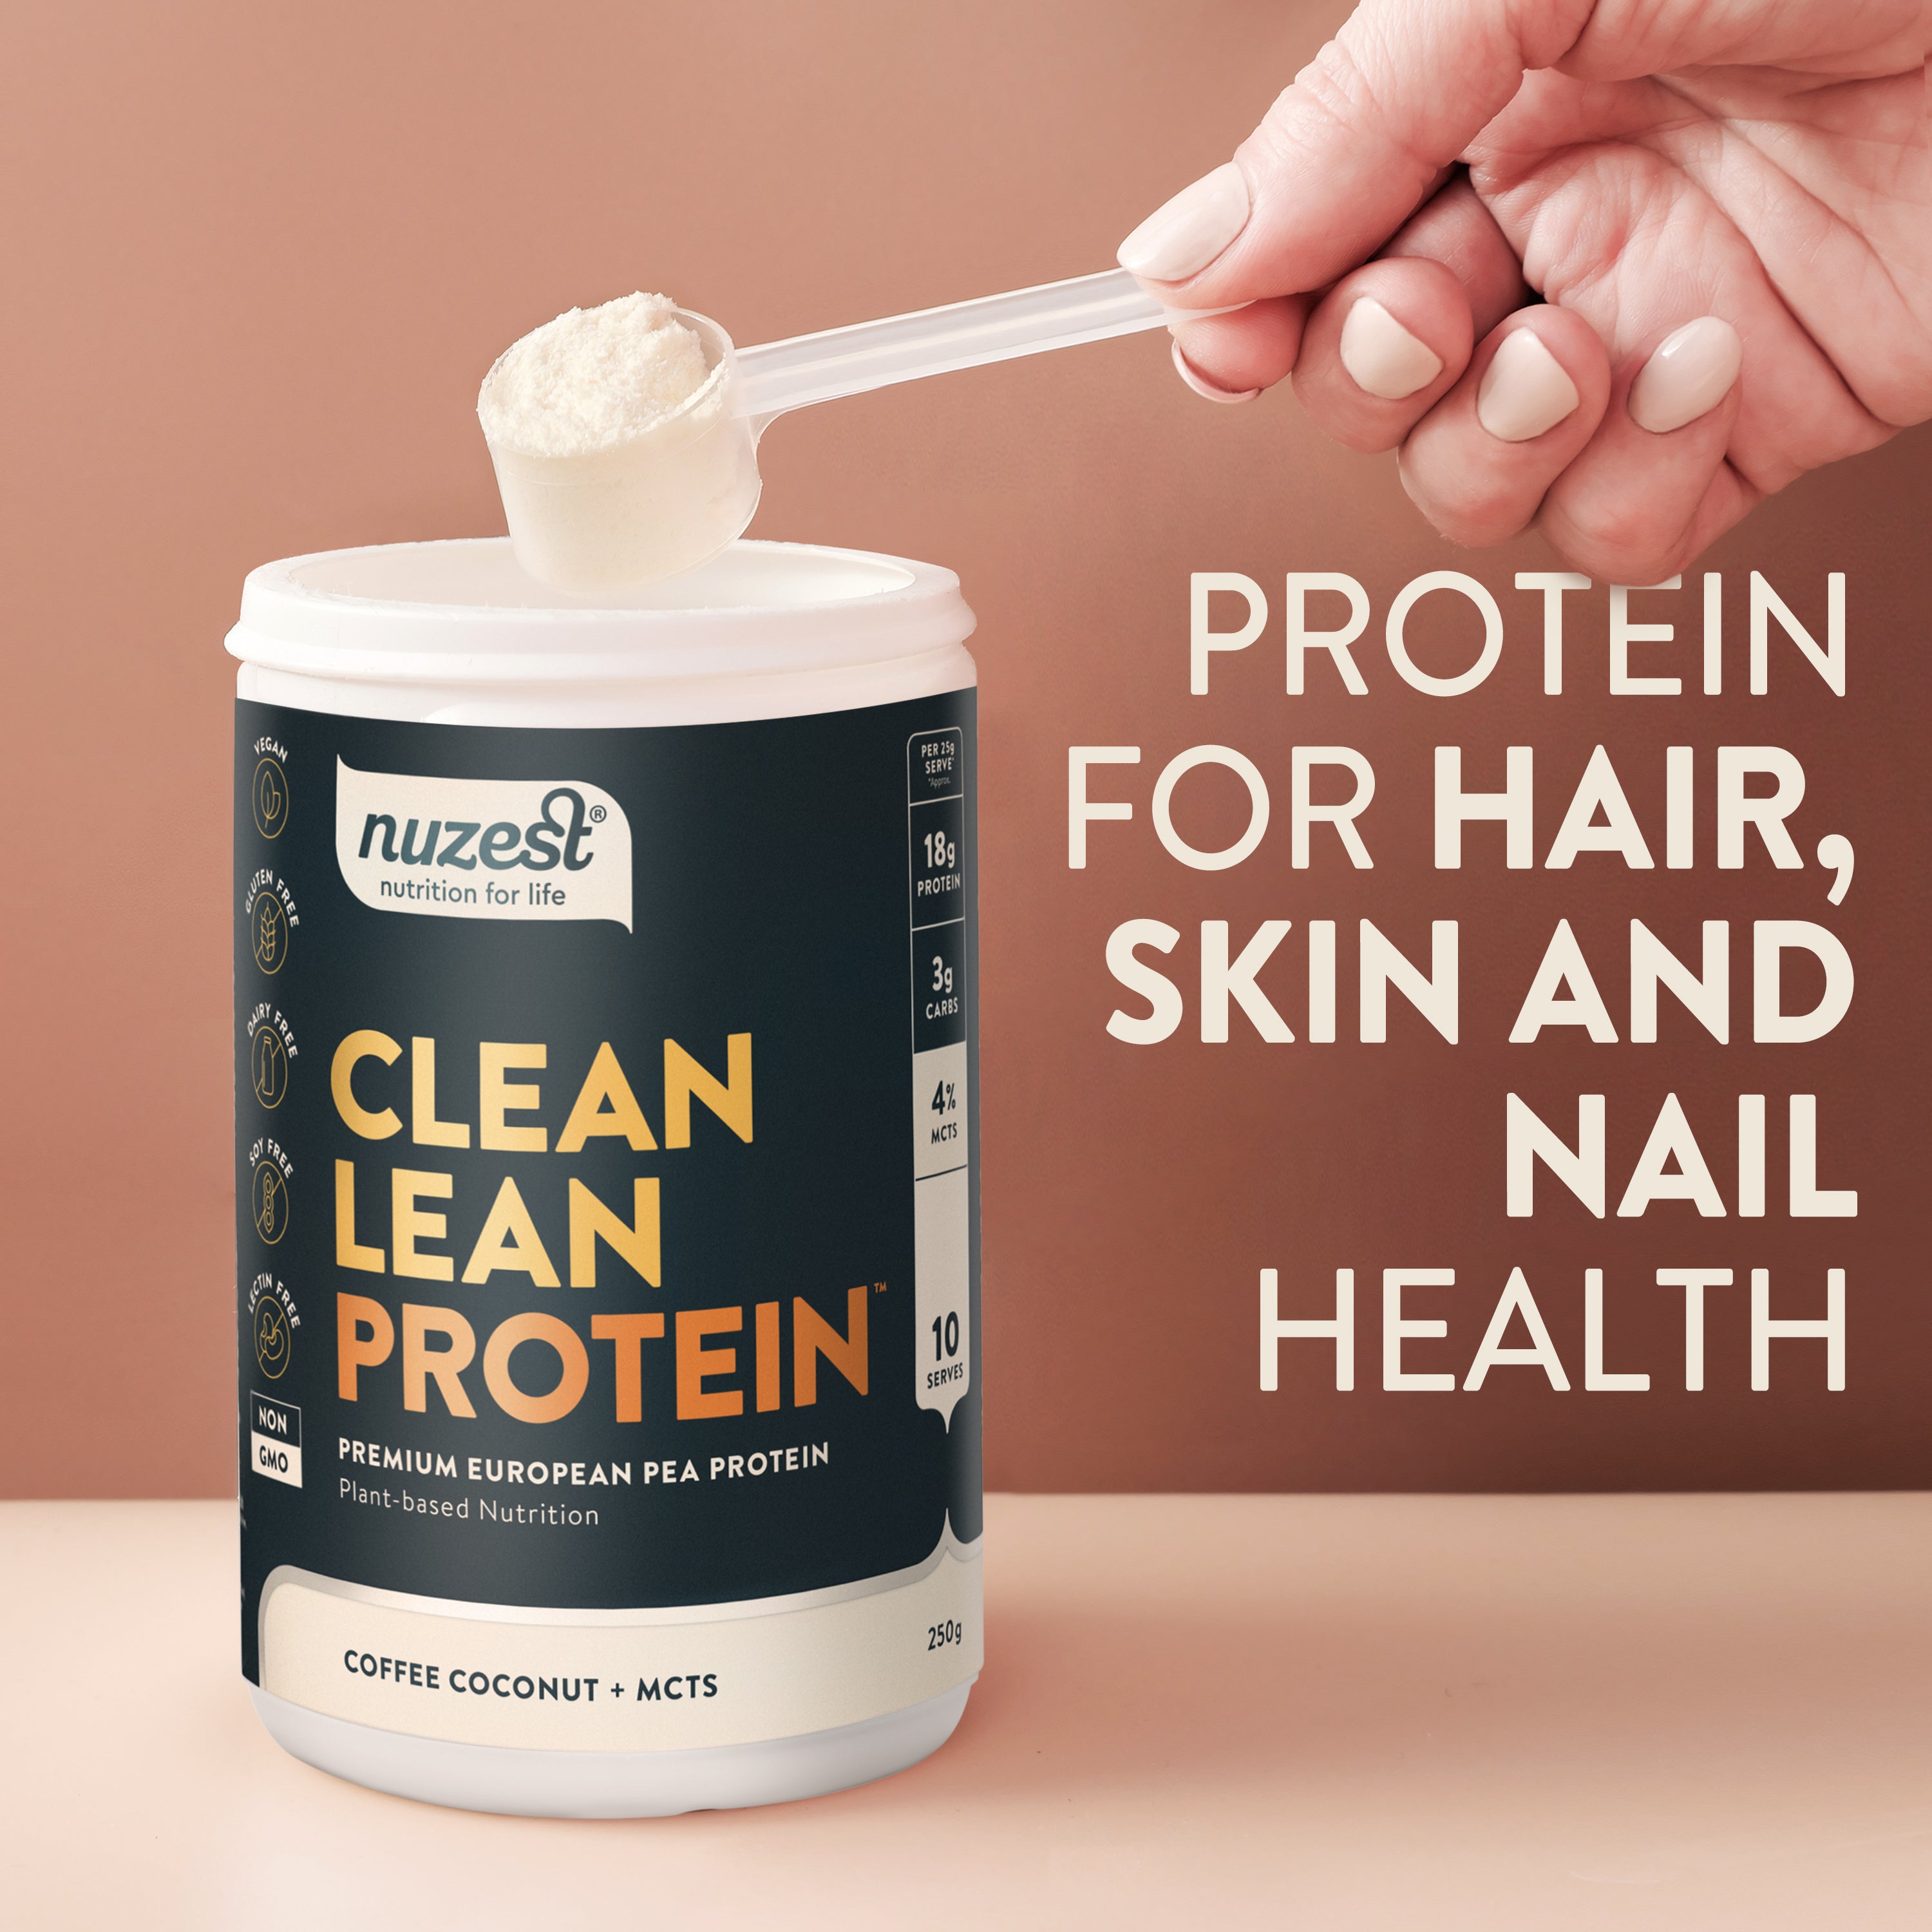 Protein for hair, skin, and nails